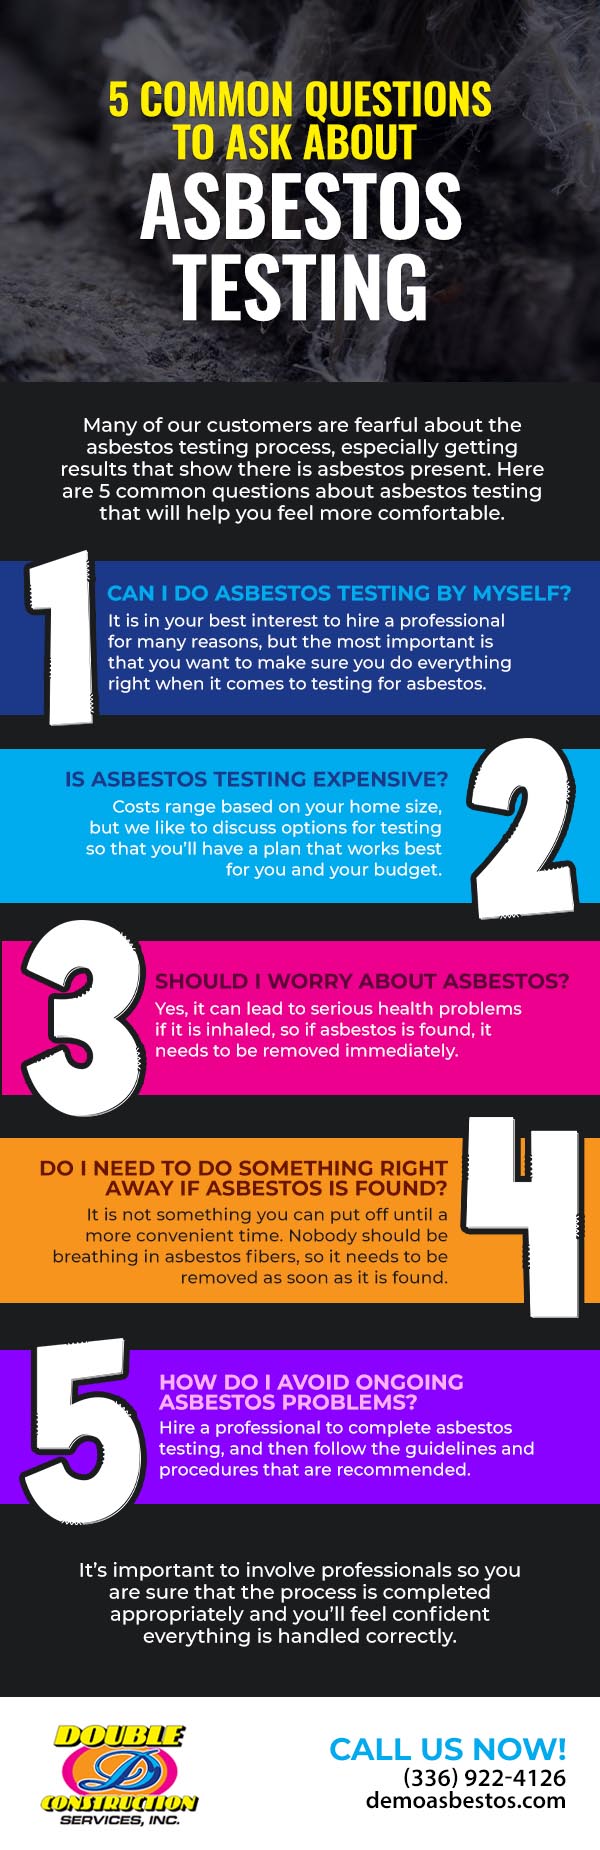 5 Common Questions to Ask About Asbestos Testing